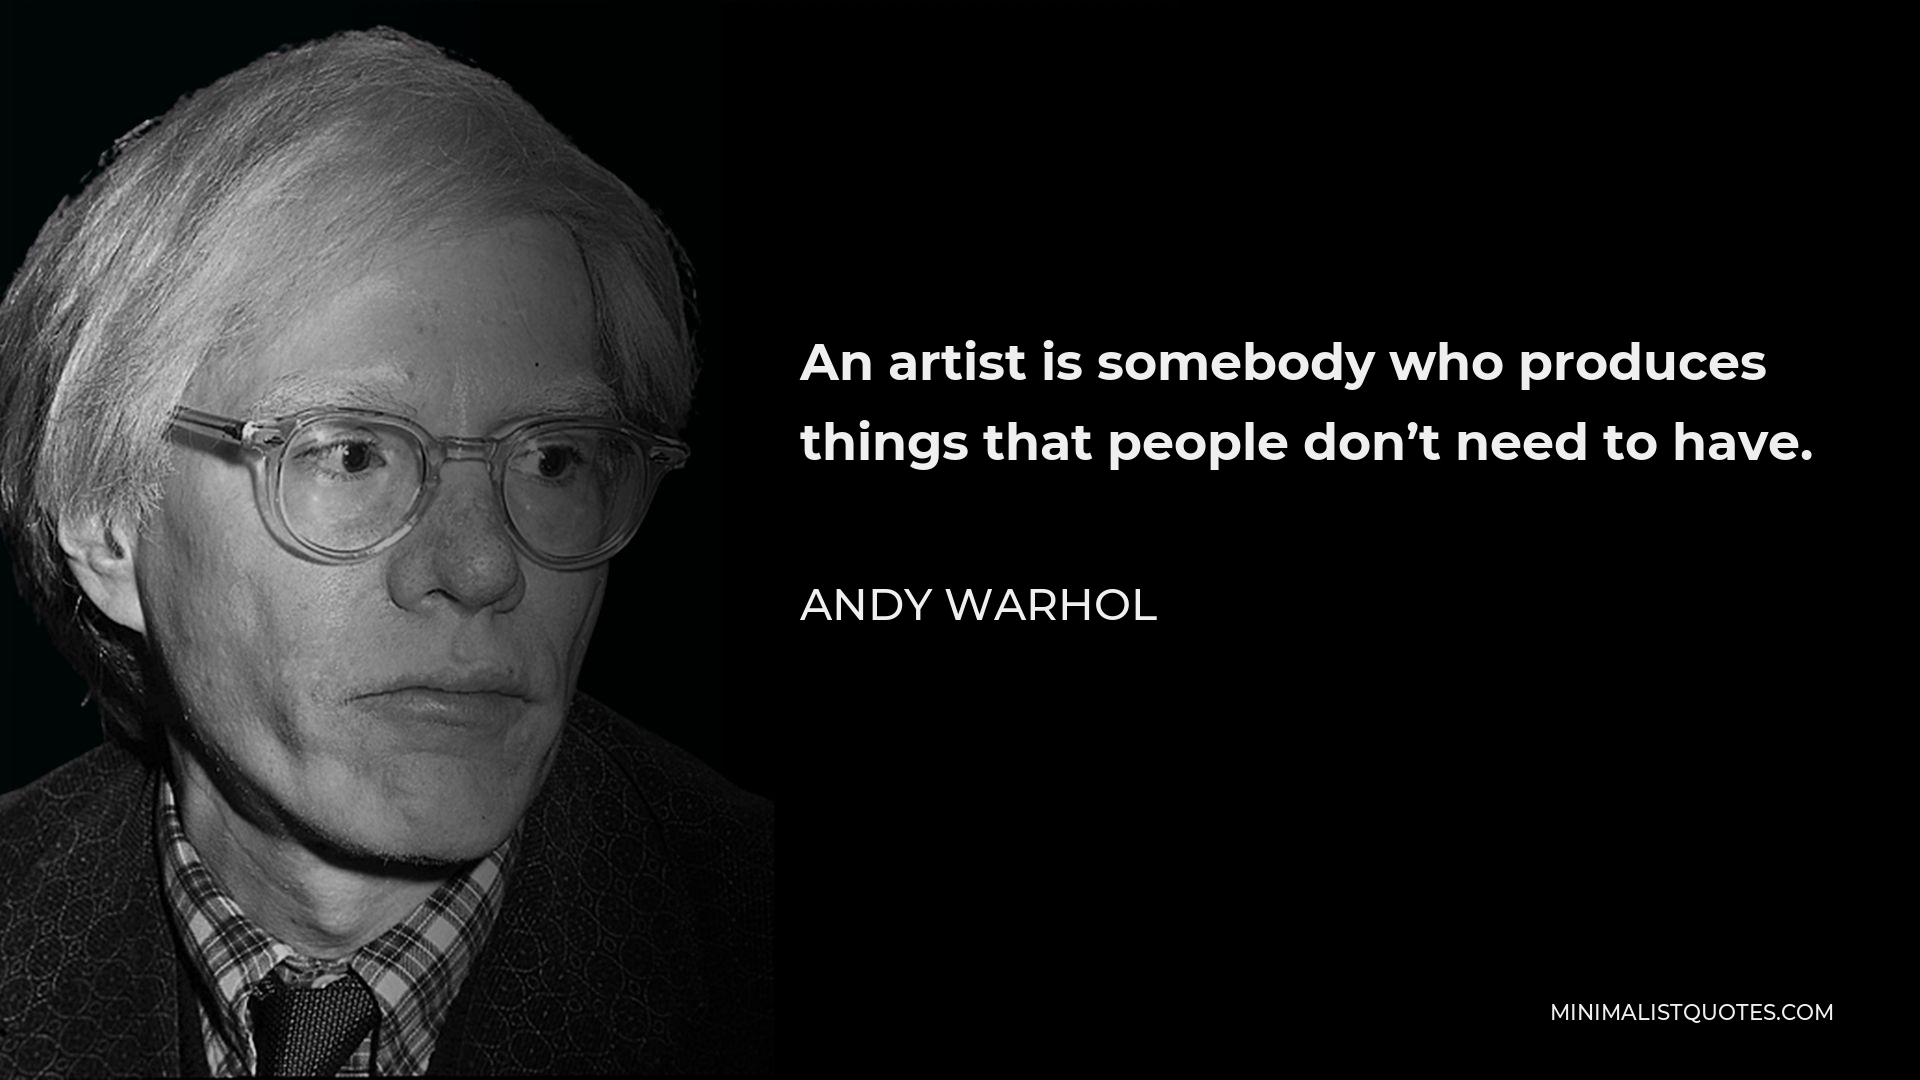 Andy Warhol Quote - An artist is somebody who produces things that people don’t need to have.